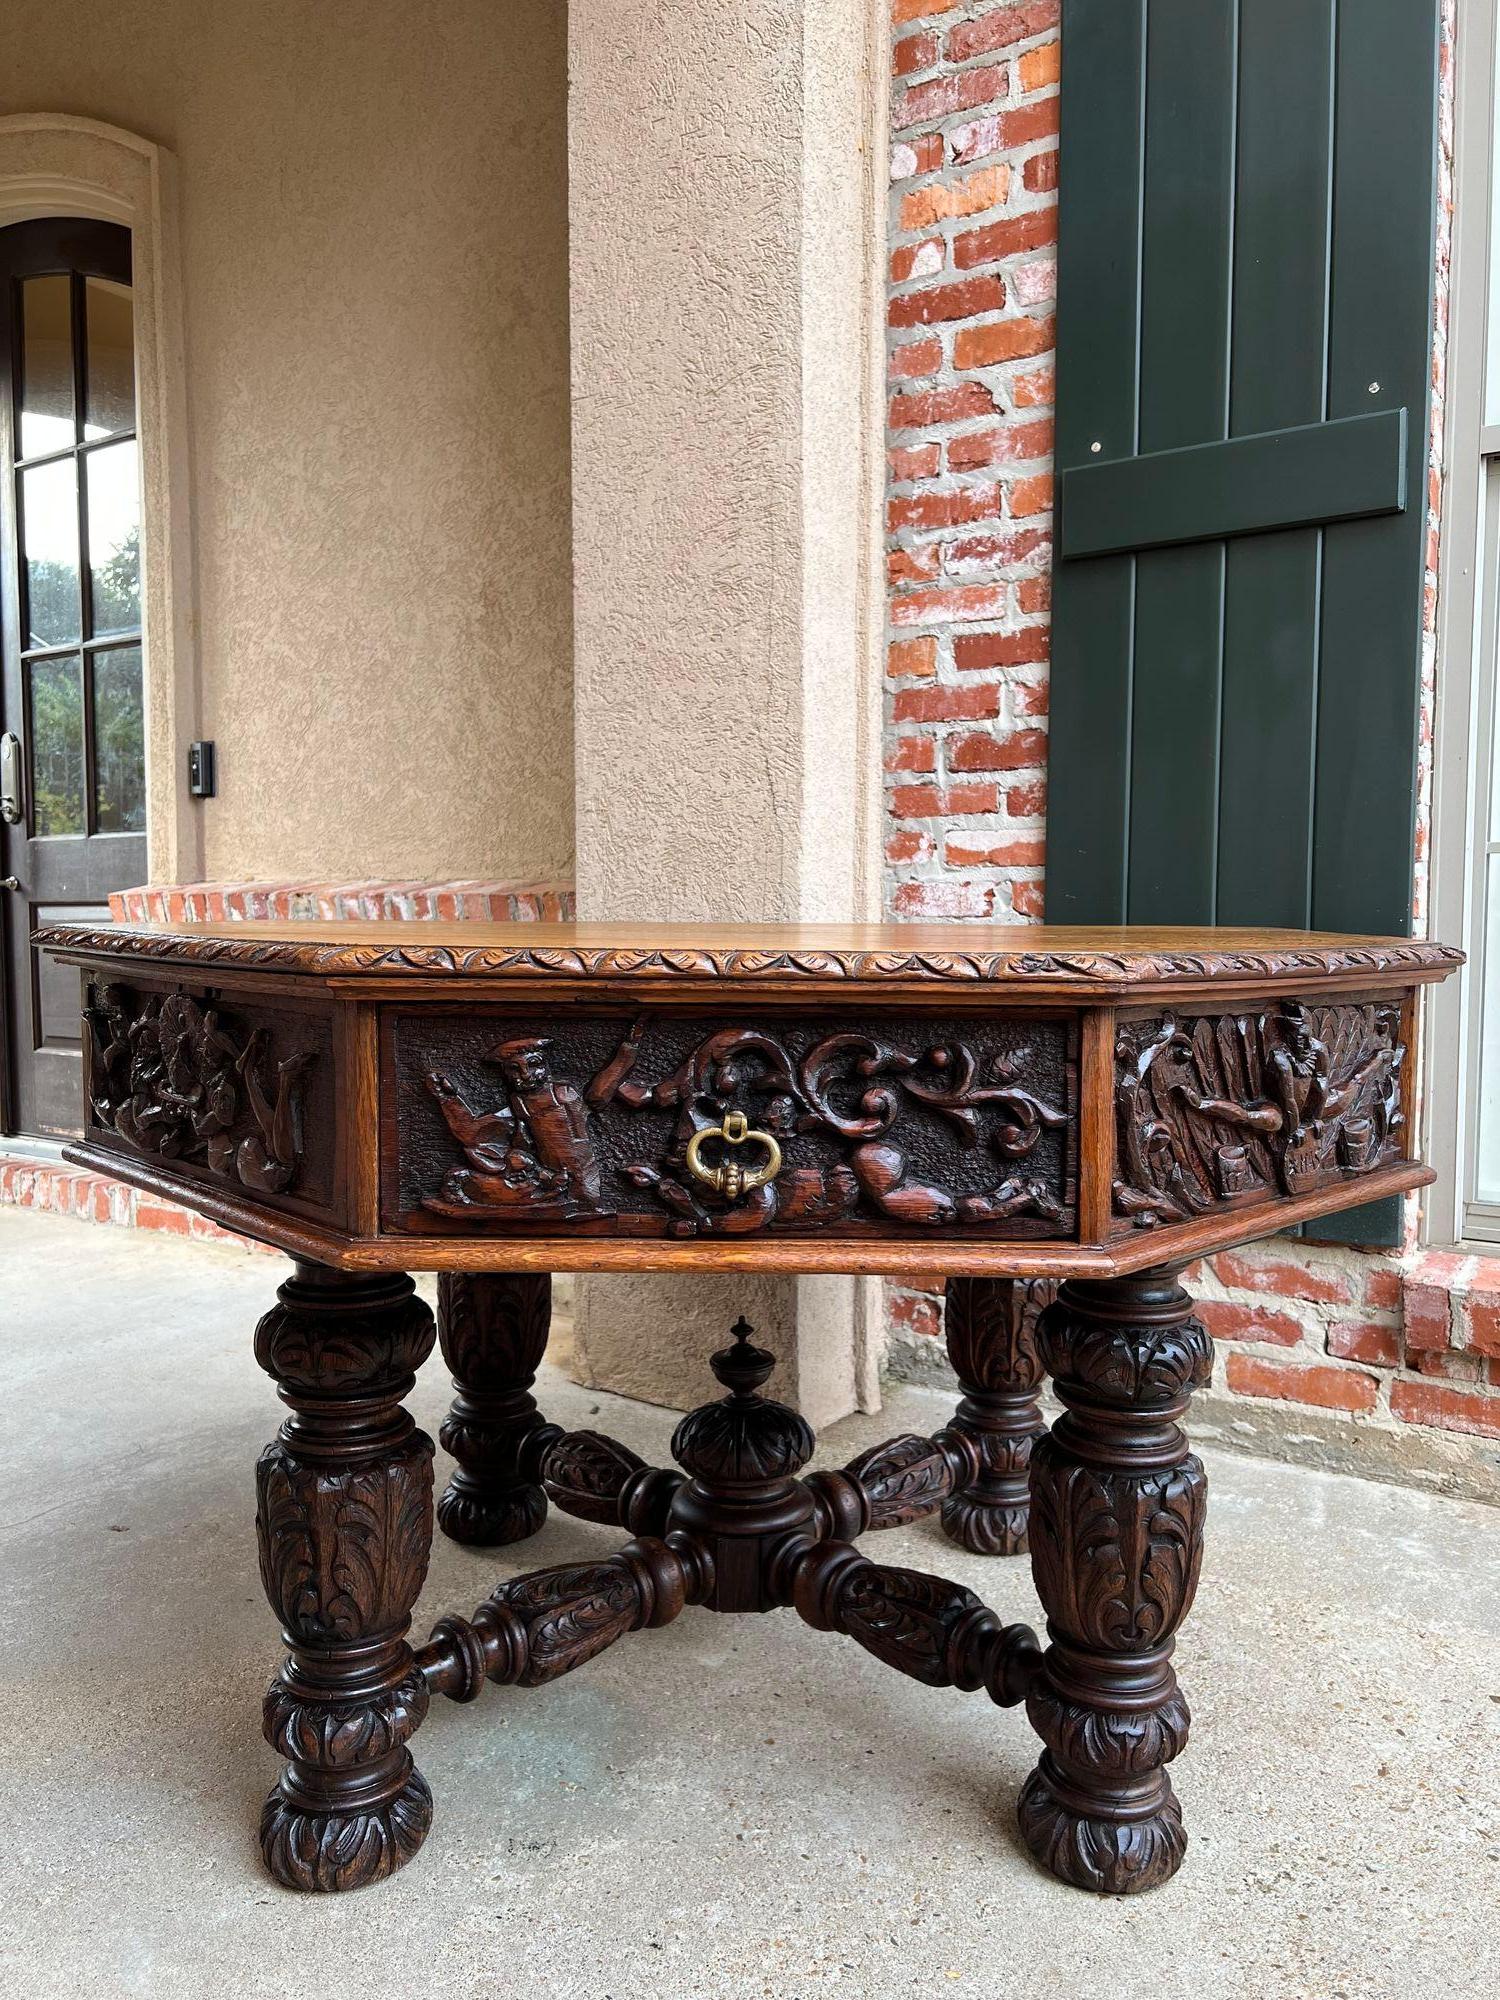 19th century antique English octagon center table whimsical game carved oak.
Direct from England, and truly an antique treasure, this amazingly hand carved octagon table. Eight wide sides, four having drawers and four fixed sides…yet each has an